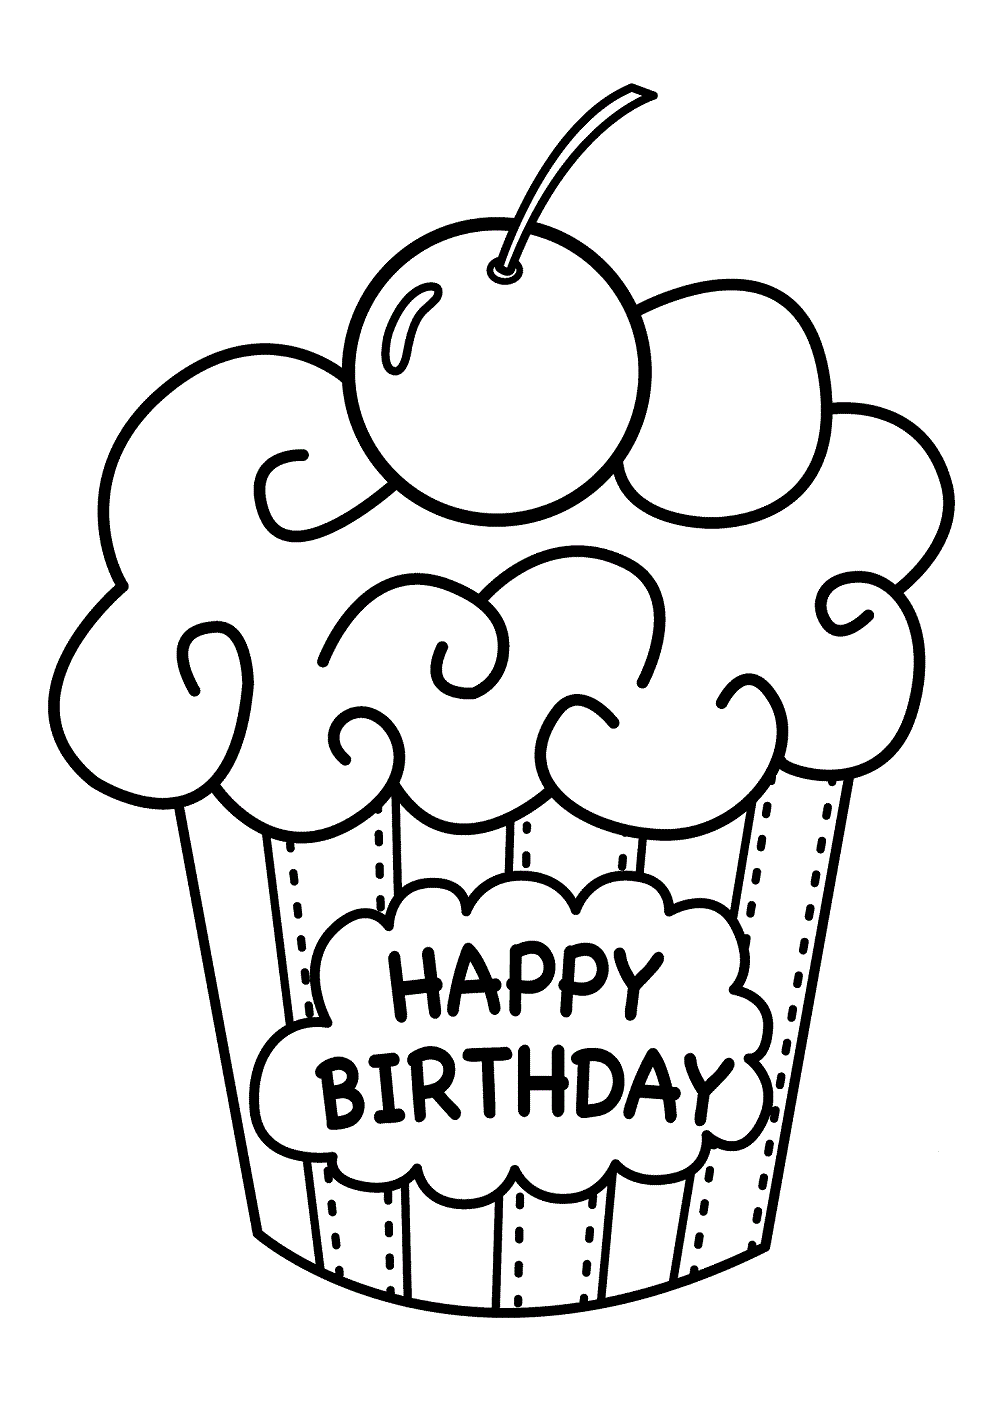 Happy Birthday Cupcake Coloring Page